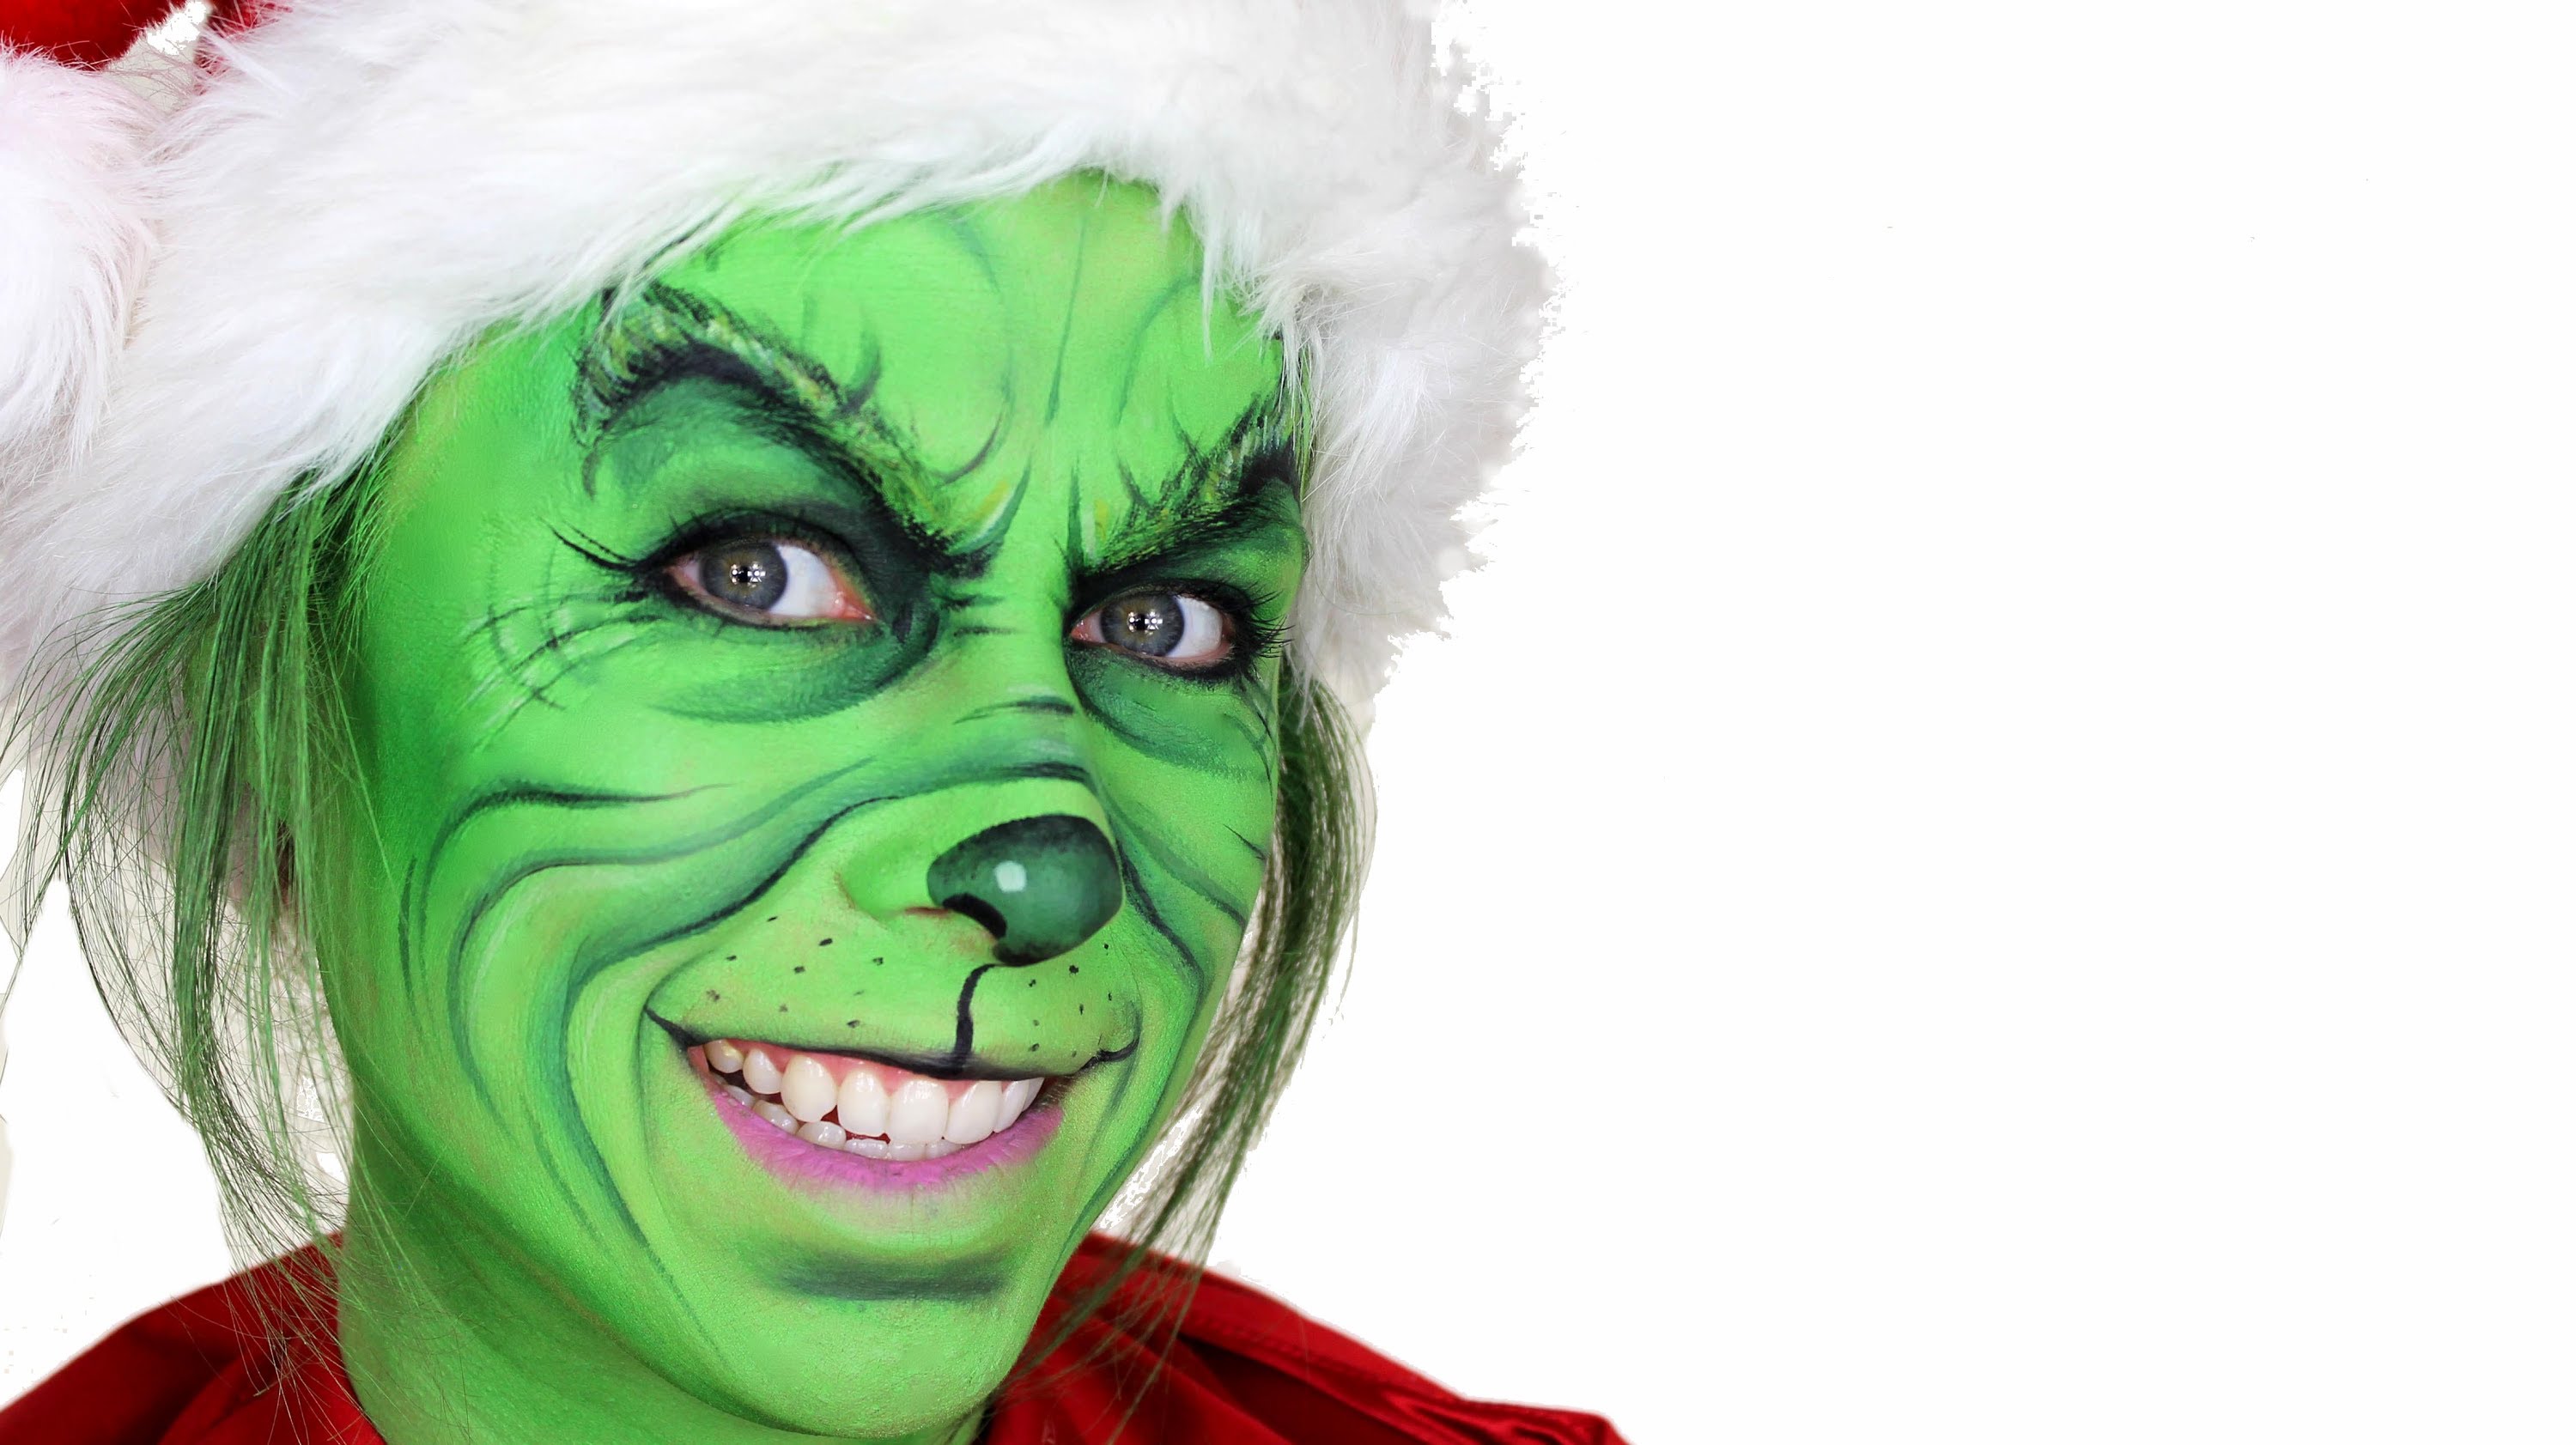 3000x1683 The Grinch Christmas Makeup Tutorial - Grinch Face Painting.